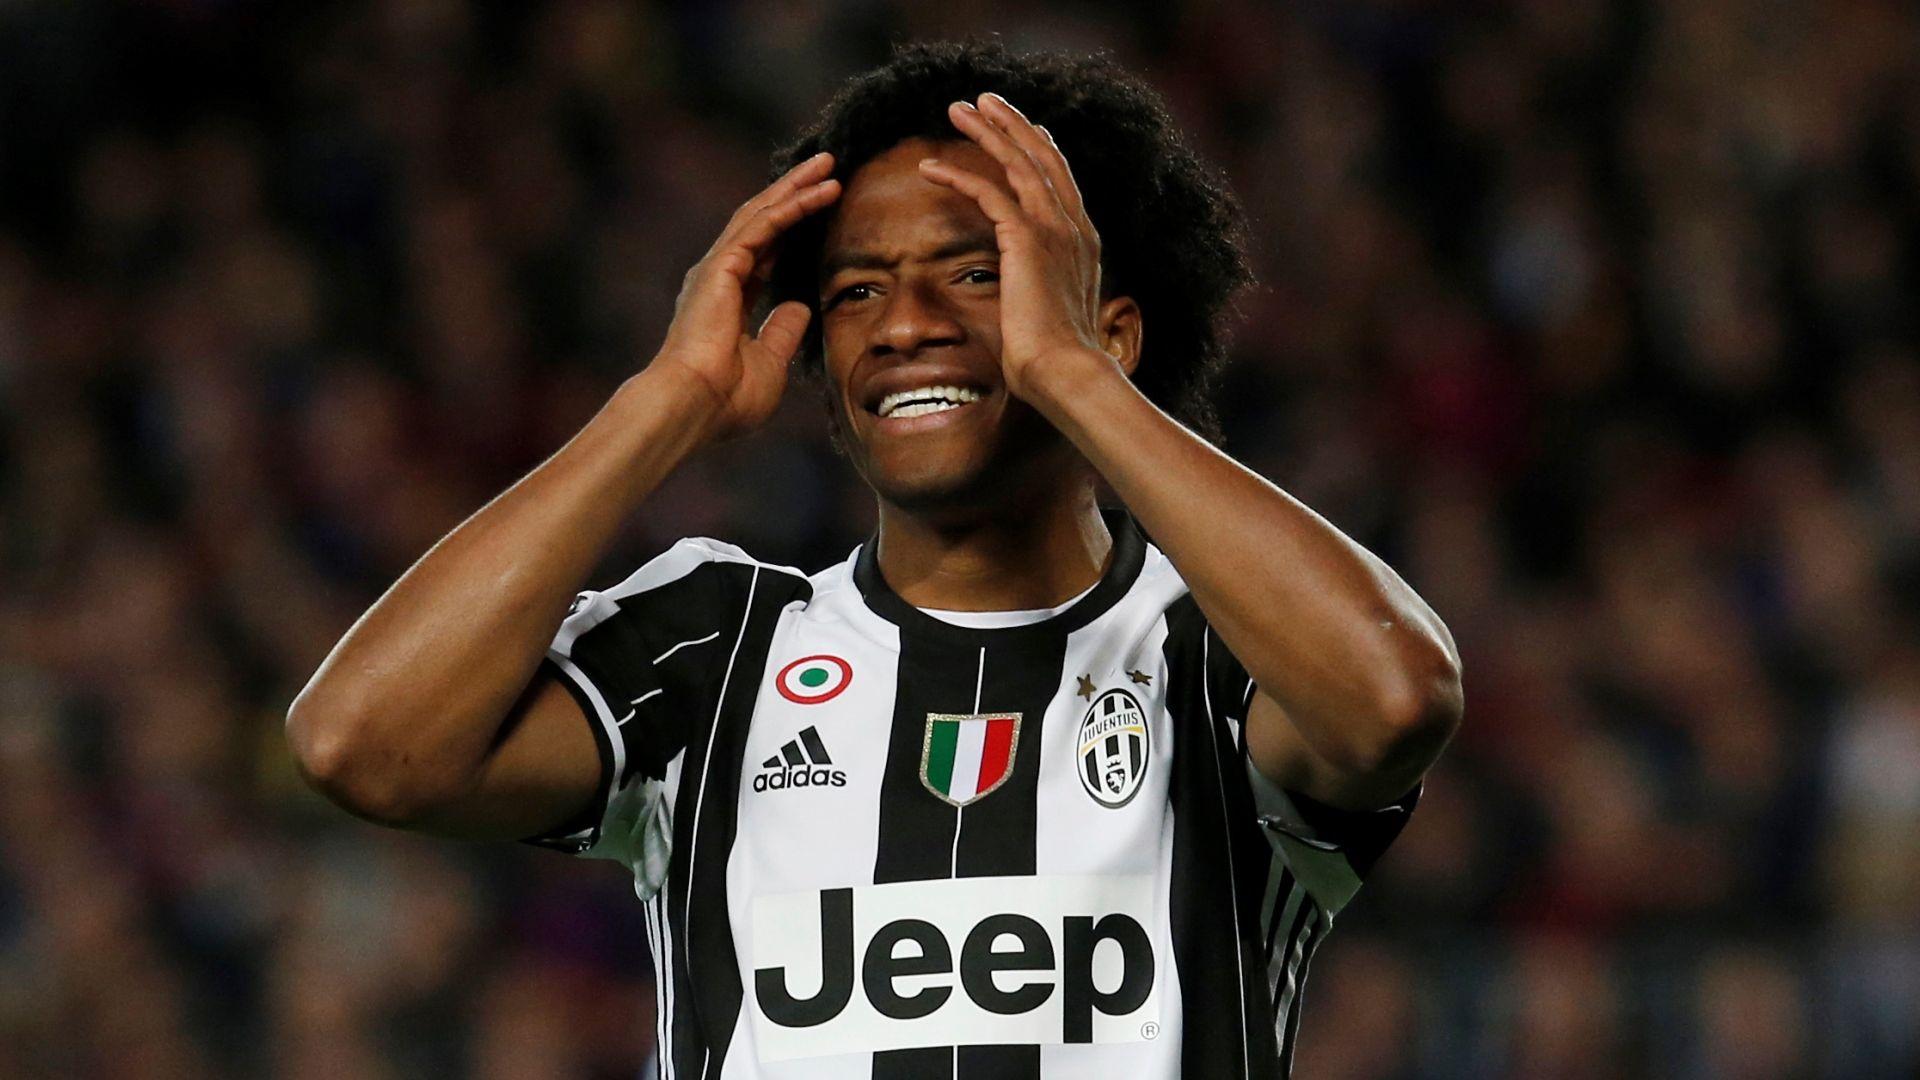 Transfer news: Juve and Cuadrado's agent yet to be contacted amid